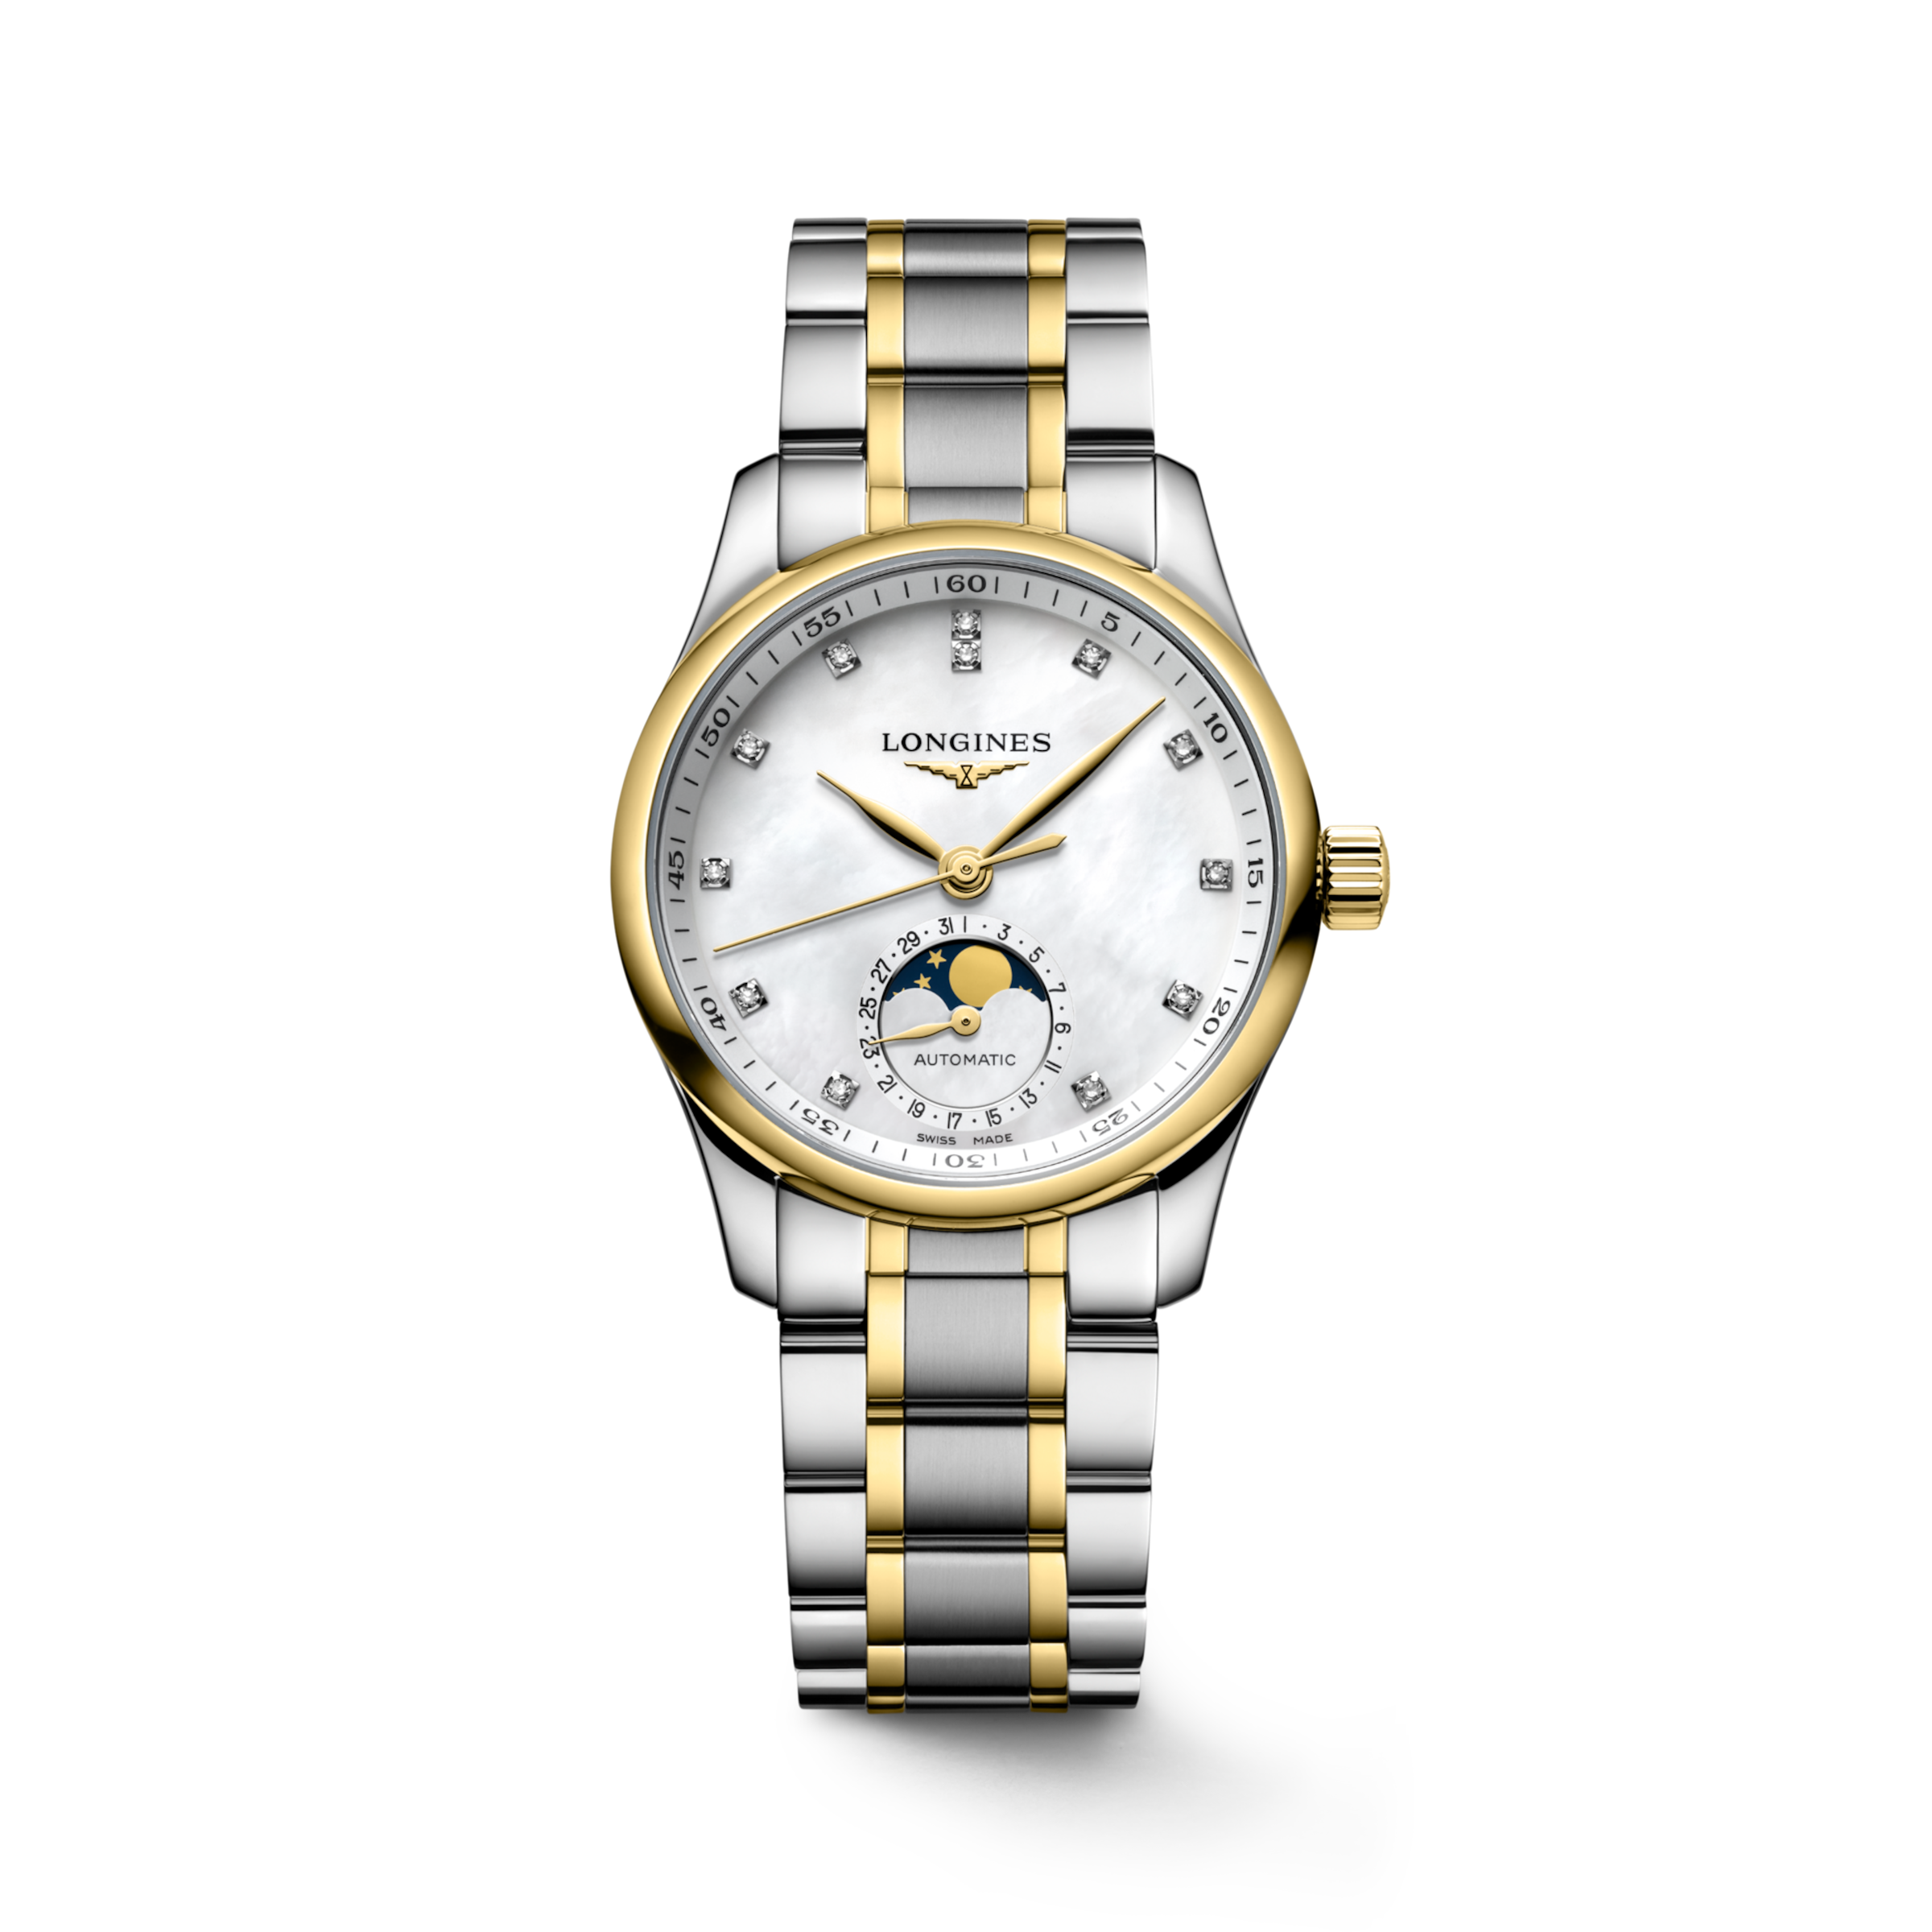 Longines MASTER COLLECTION Automatic Stainless steel and 18 karat yellow gold cap 200 Watch - L2.409.5.87.7